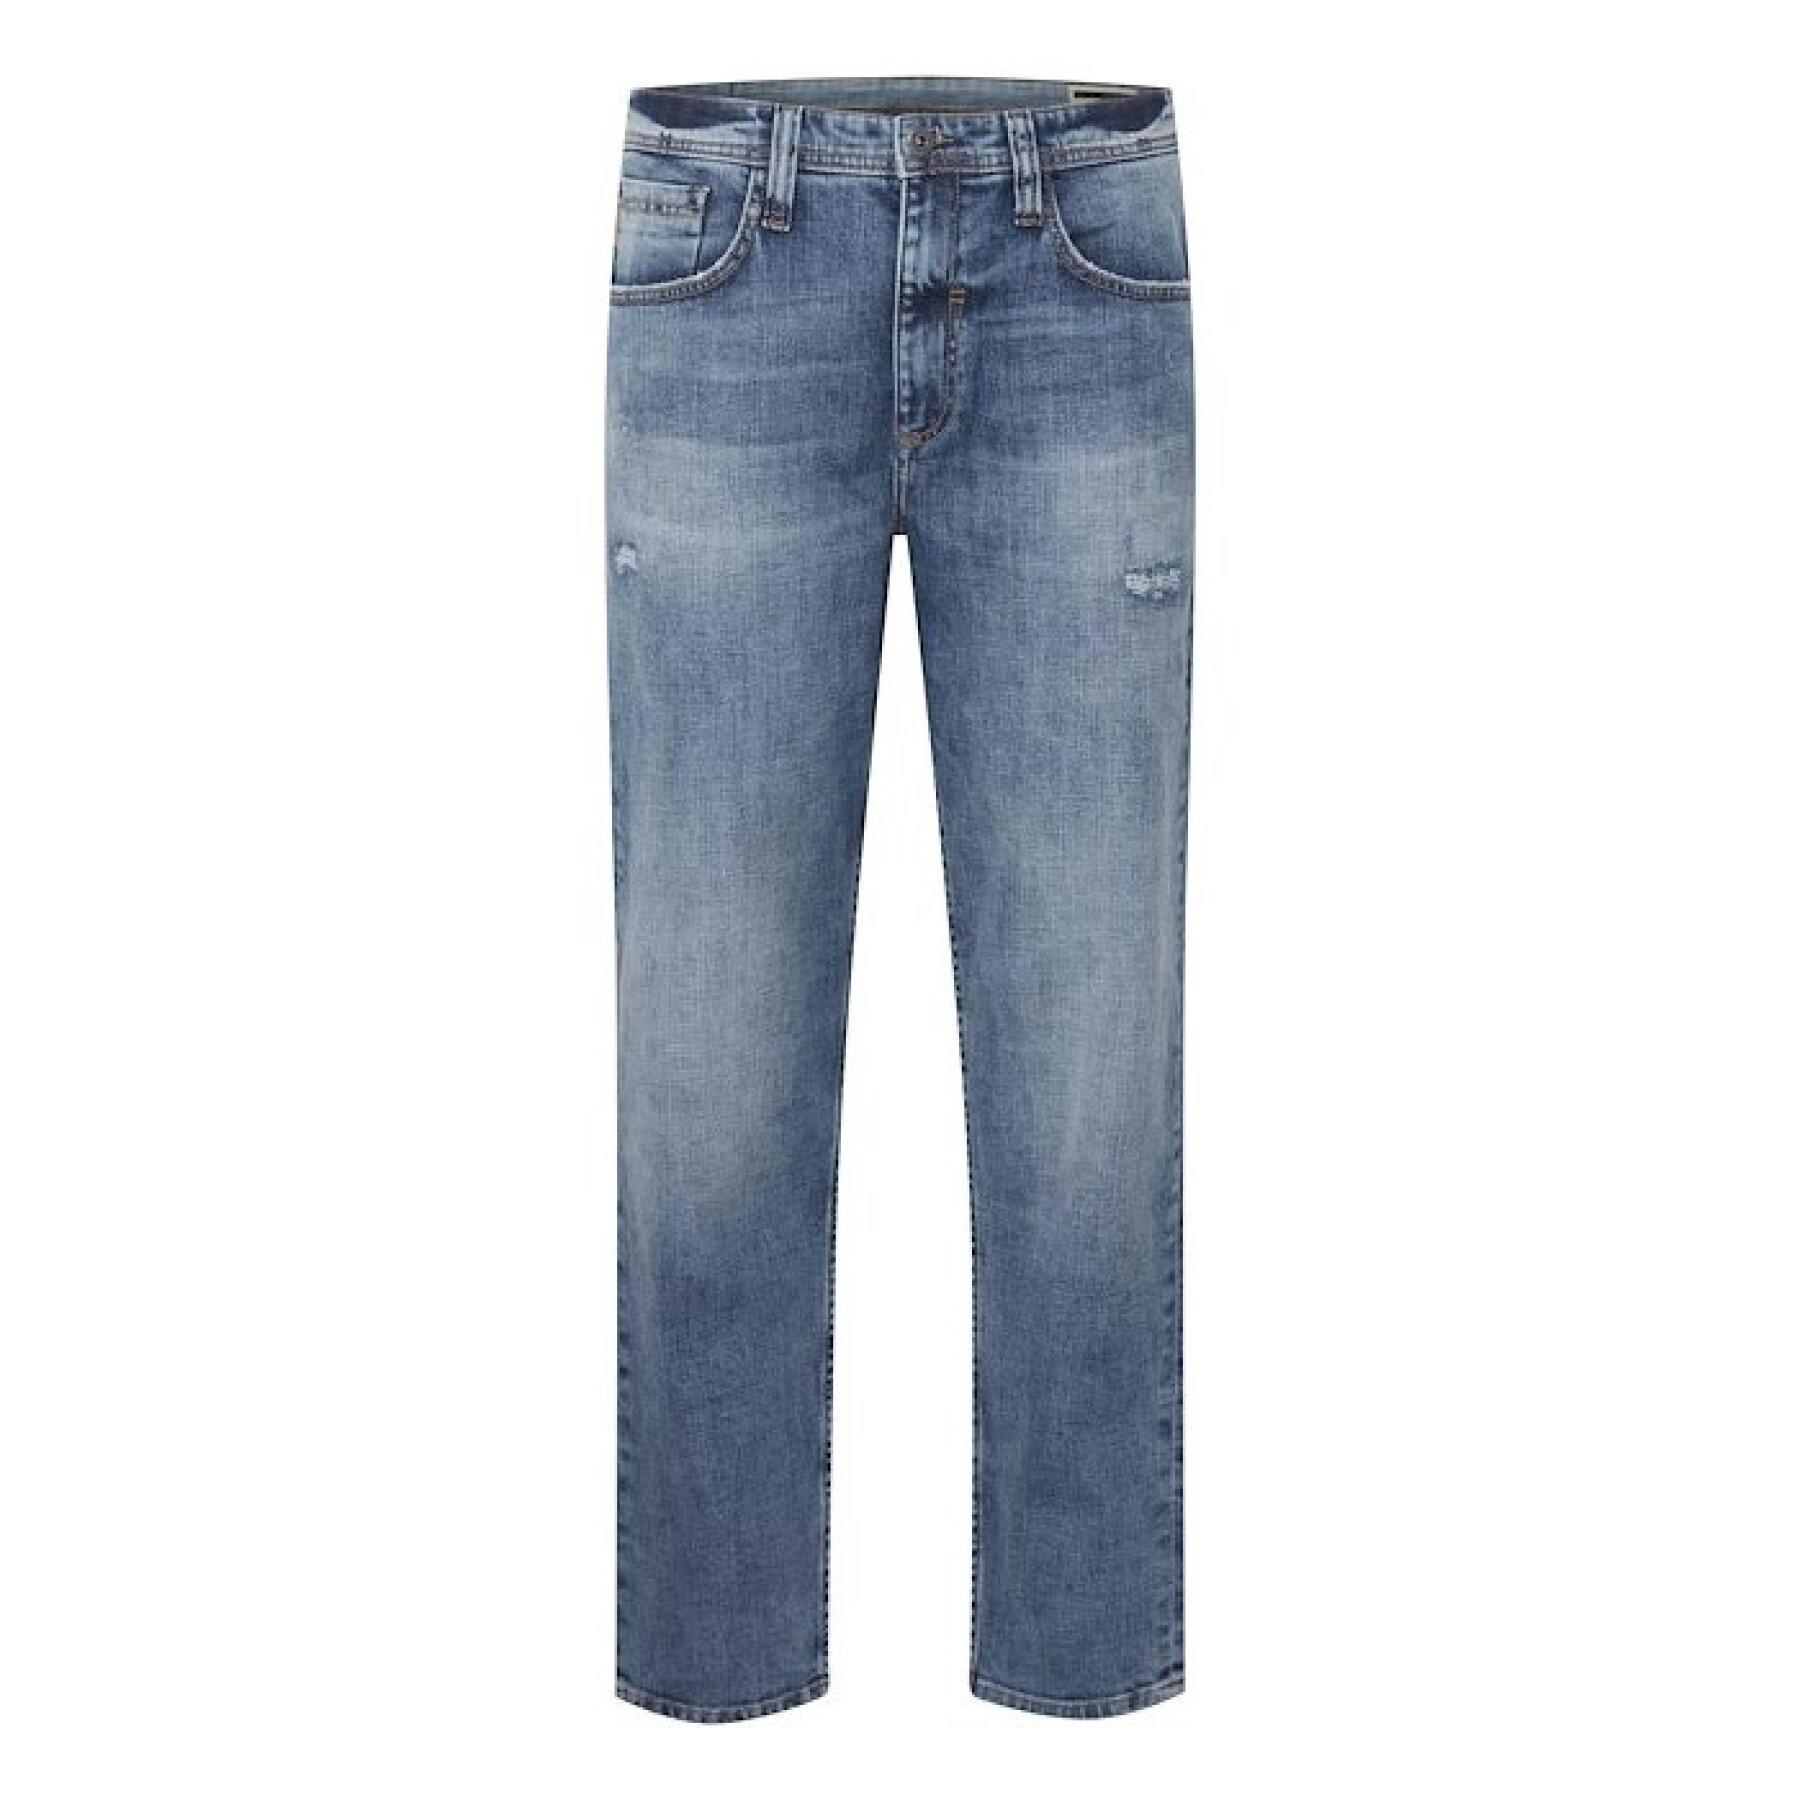 Jeans thunder cup woman Blend